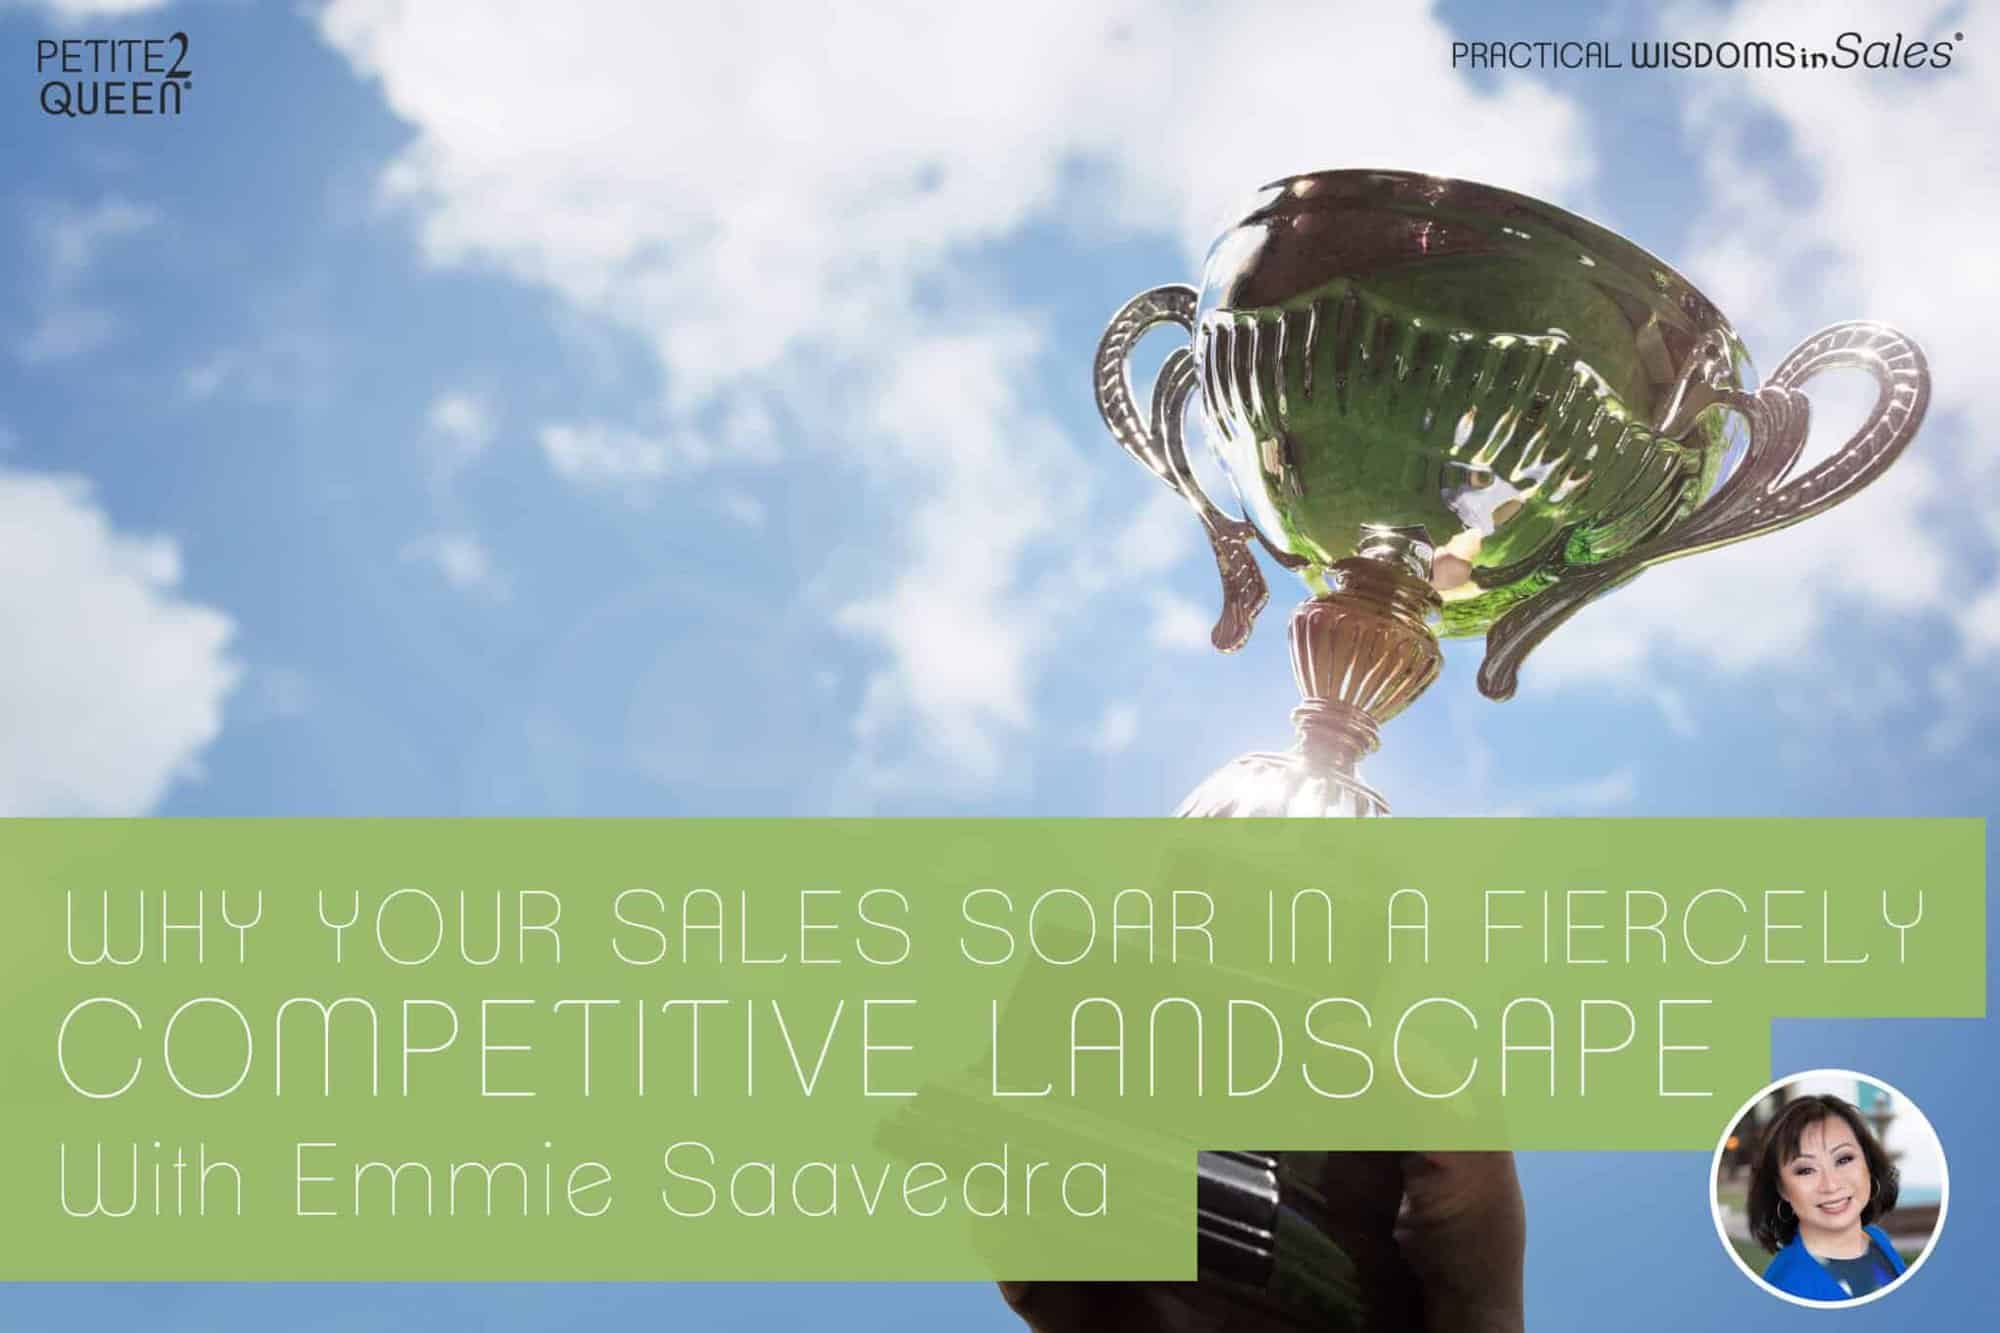 Why Your Sales Soar in a Fiercely Competitive Landscape - Emmie Saavedra